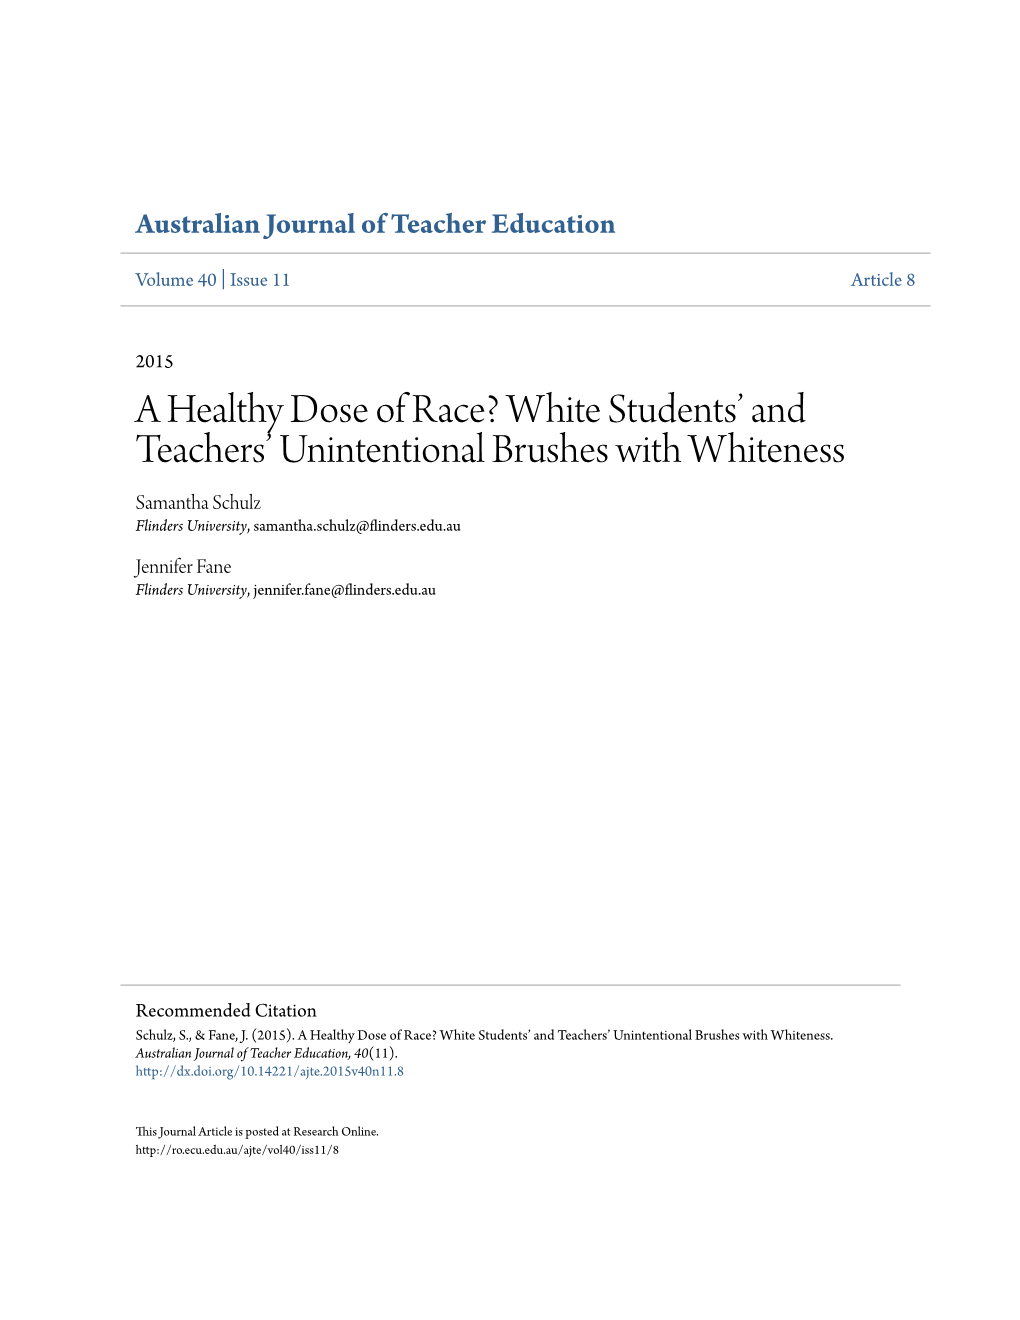 A Healthy Dose of Race? White Students' and Teachers